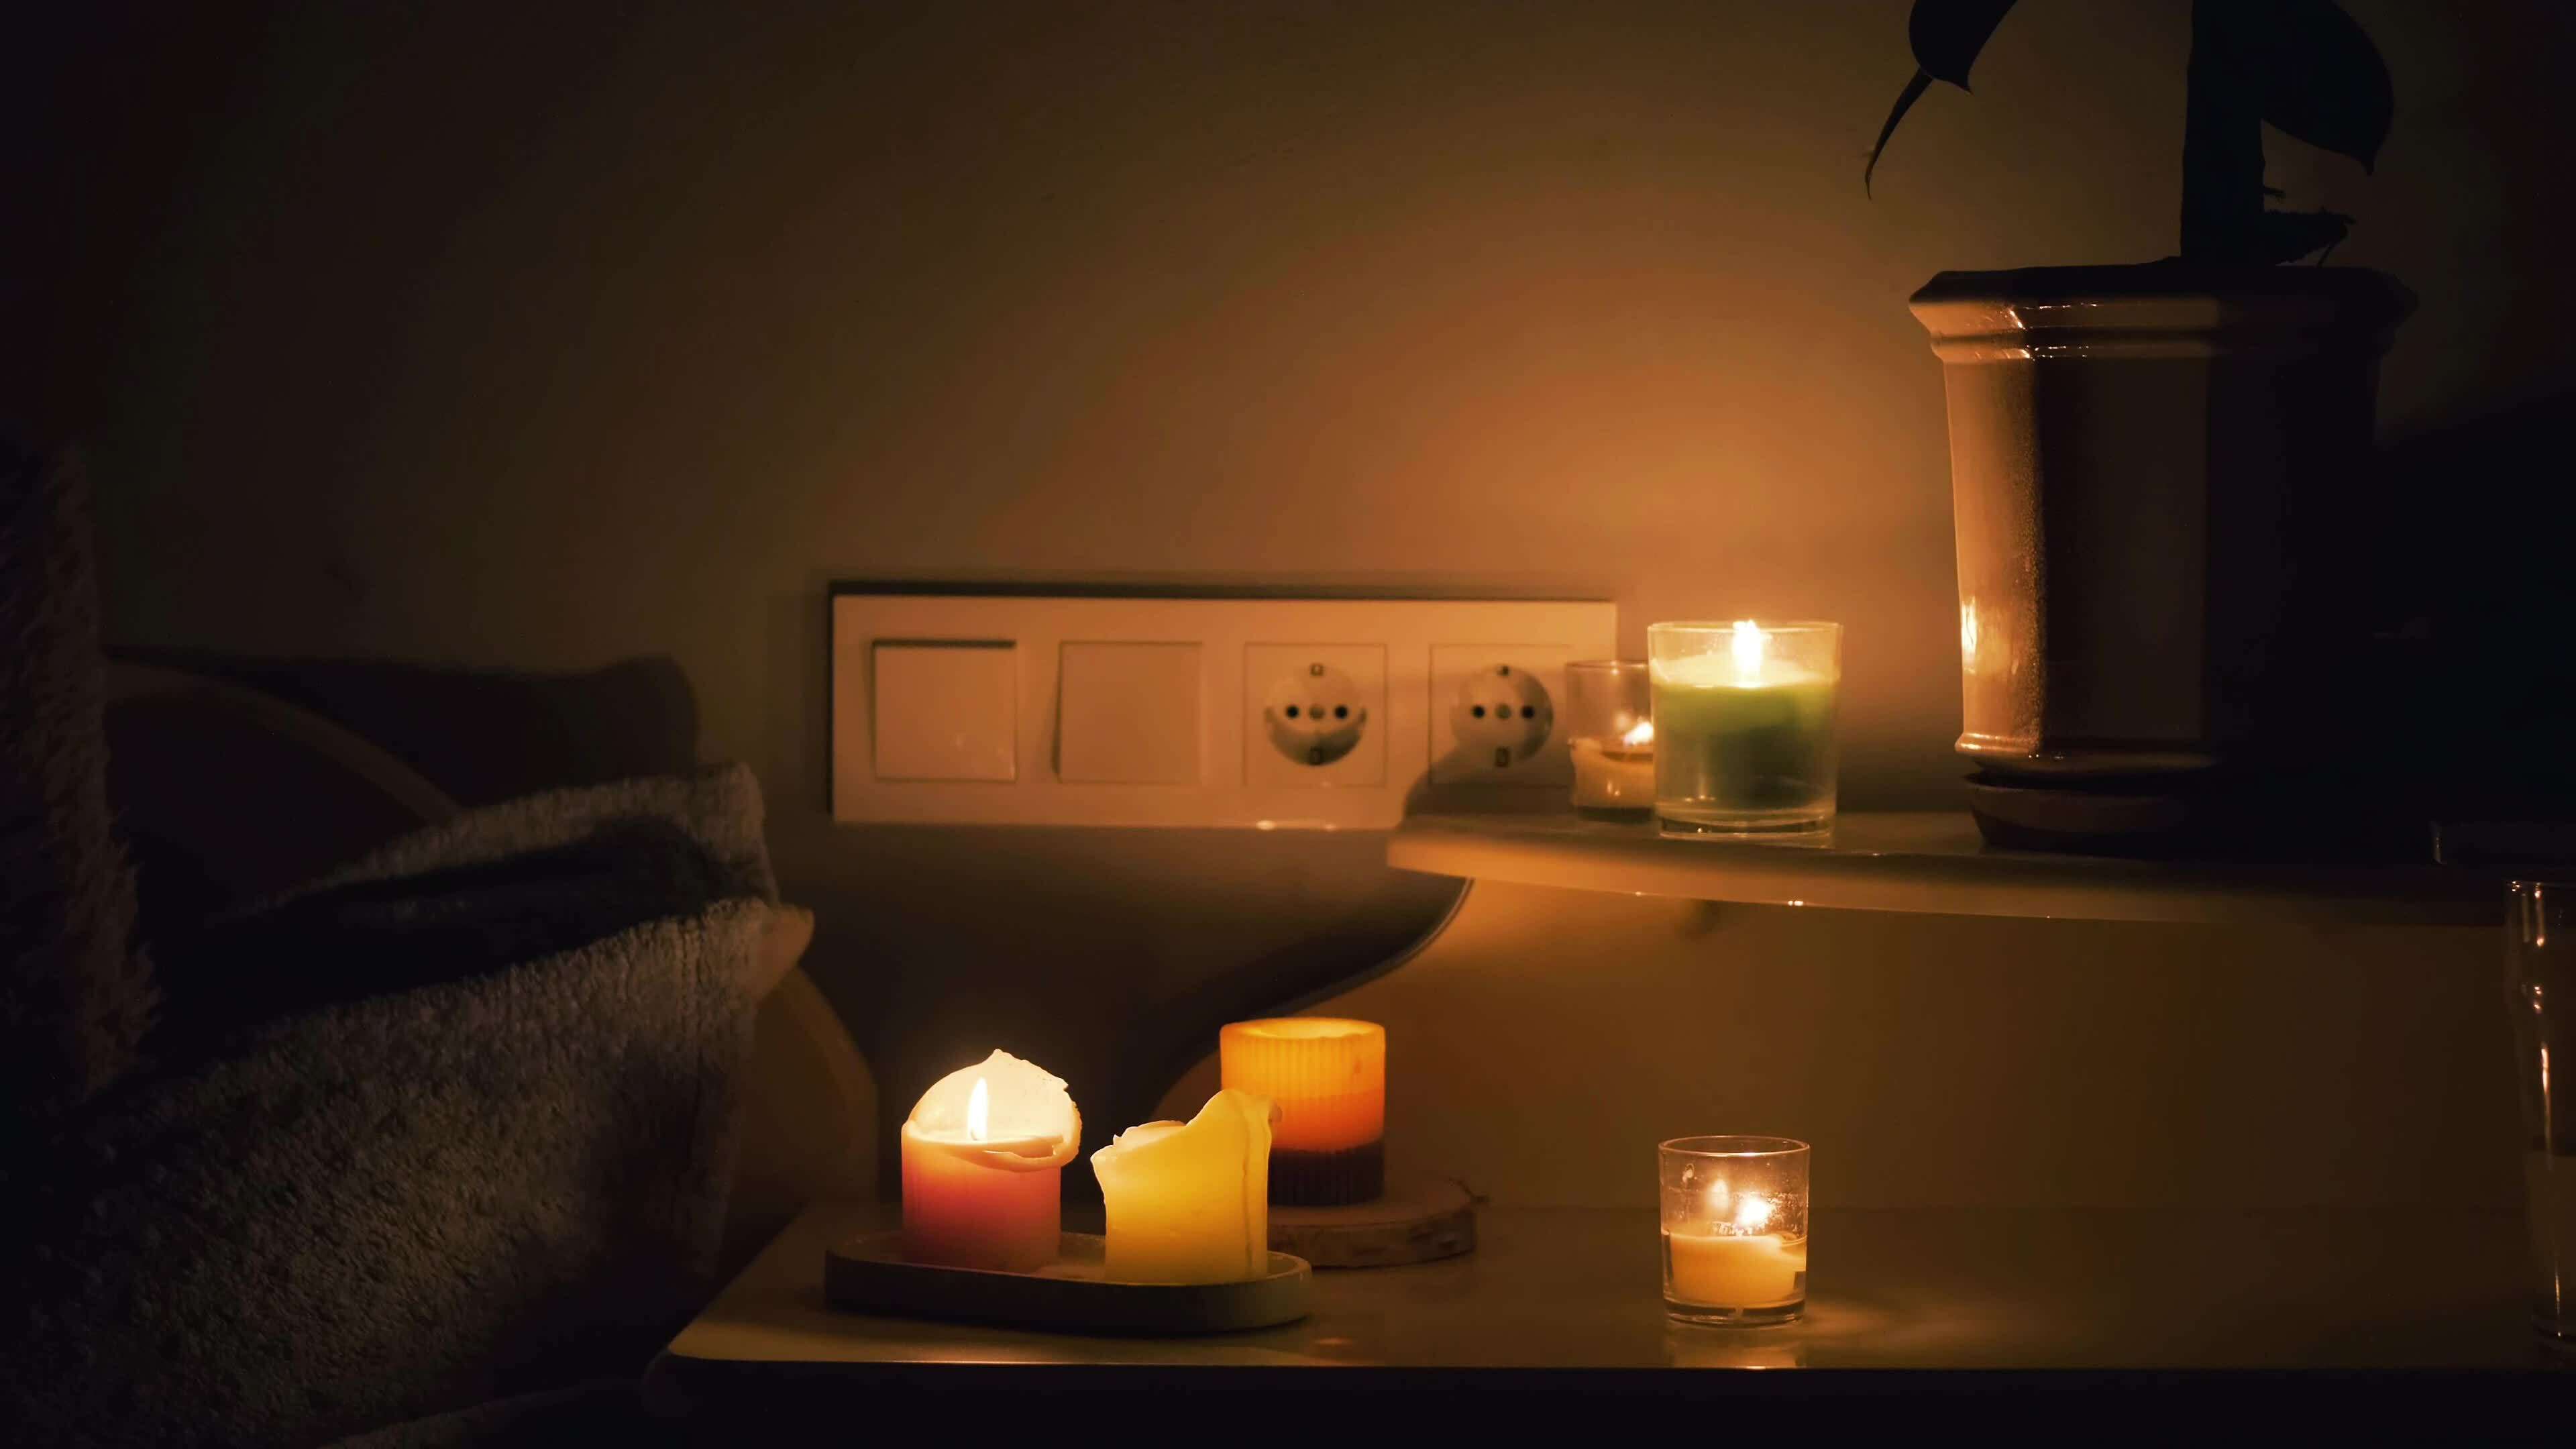 https://static.vecteezy.com/system/resources/thumbnails/028/623/639/original/candles-in-a-dark-room-burning-candles-on-the-table-and-sockets-on-the-background-no-electricity-in-the-house-blackout-in-the-city-power-outage-energy-crisis-concept-free-video.jpg